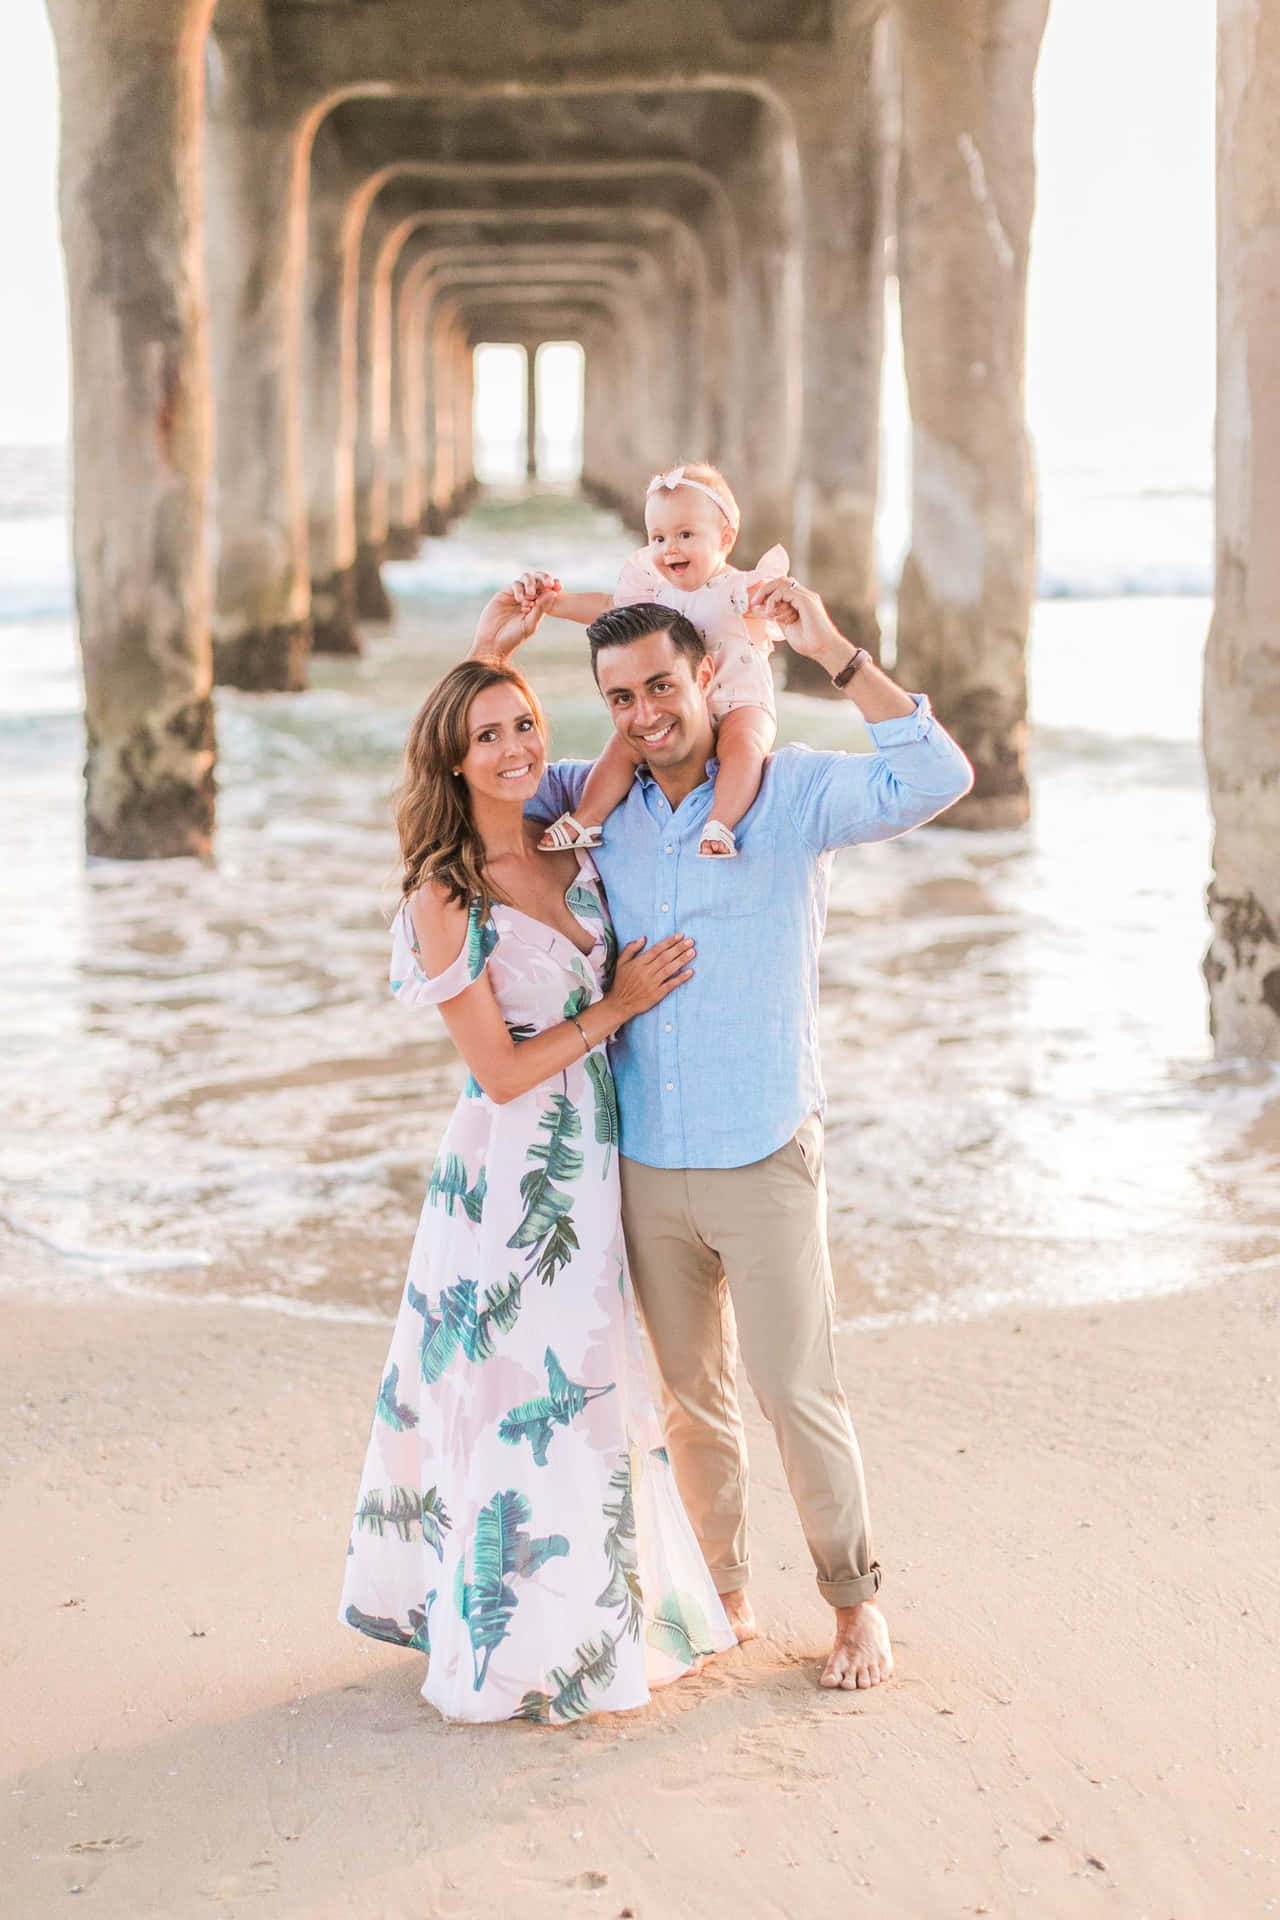 A Family Poses Under The Pier With Their Baby